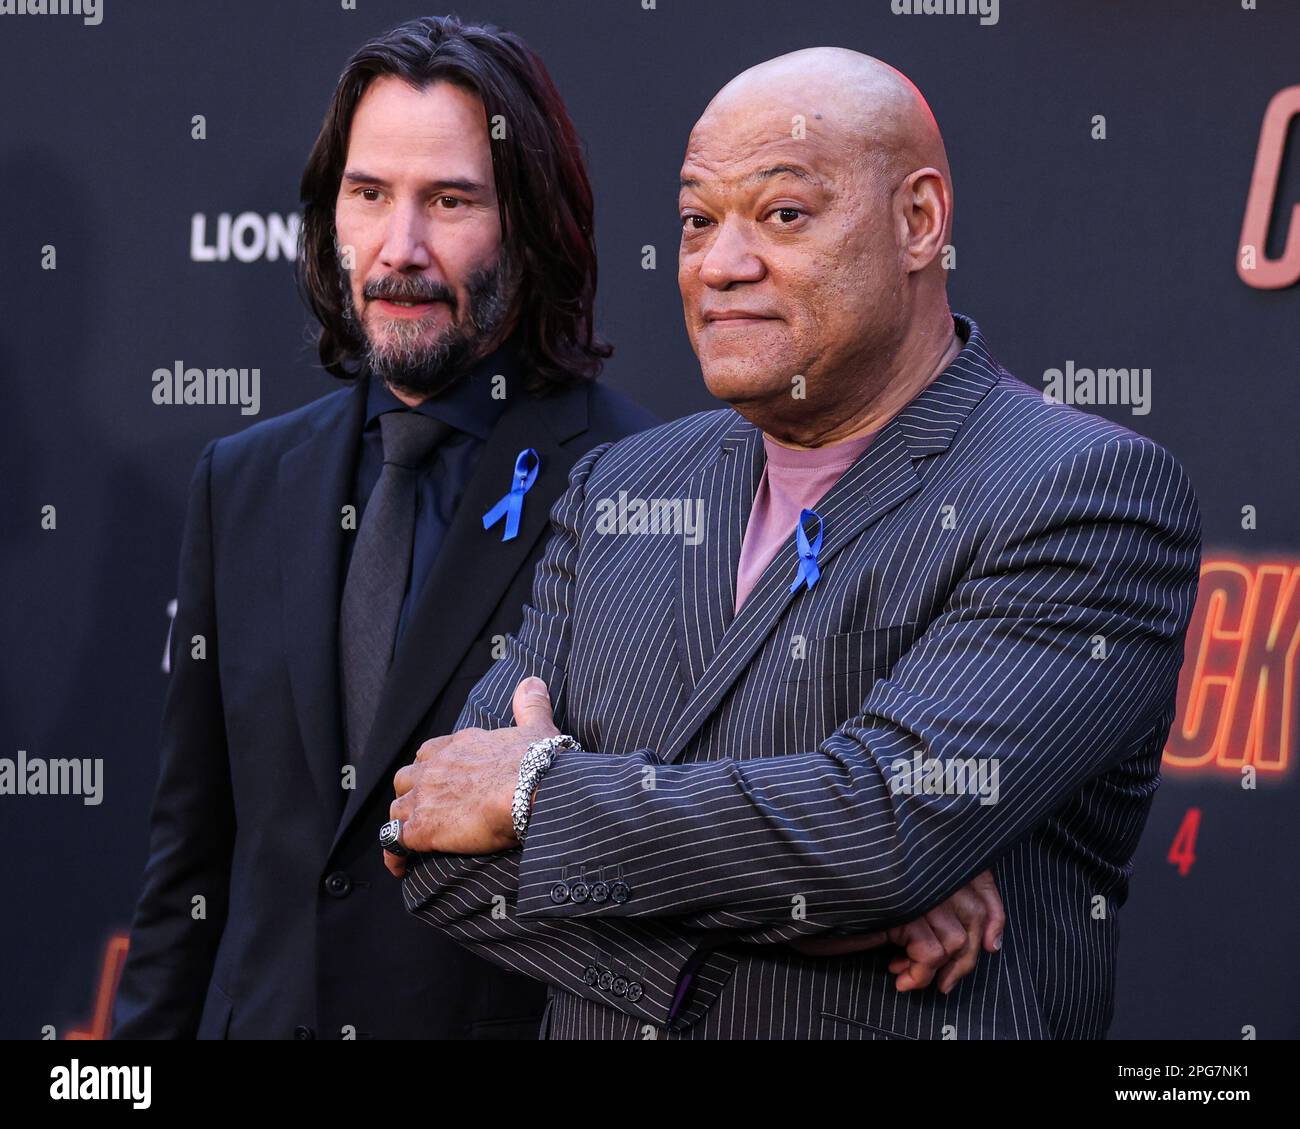 John Wick - Summit Entertainment, a Lionsgate Company, Los Angeles Premiere  of John Wick Chapter 2 Director/Executive Producer Chad Stahelski,  Laurence Fishburne, Ruby Rose and Keanu Reeves seen at Summit  Entertainment, a